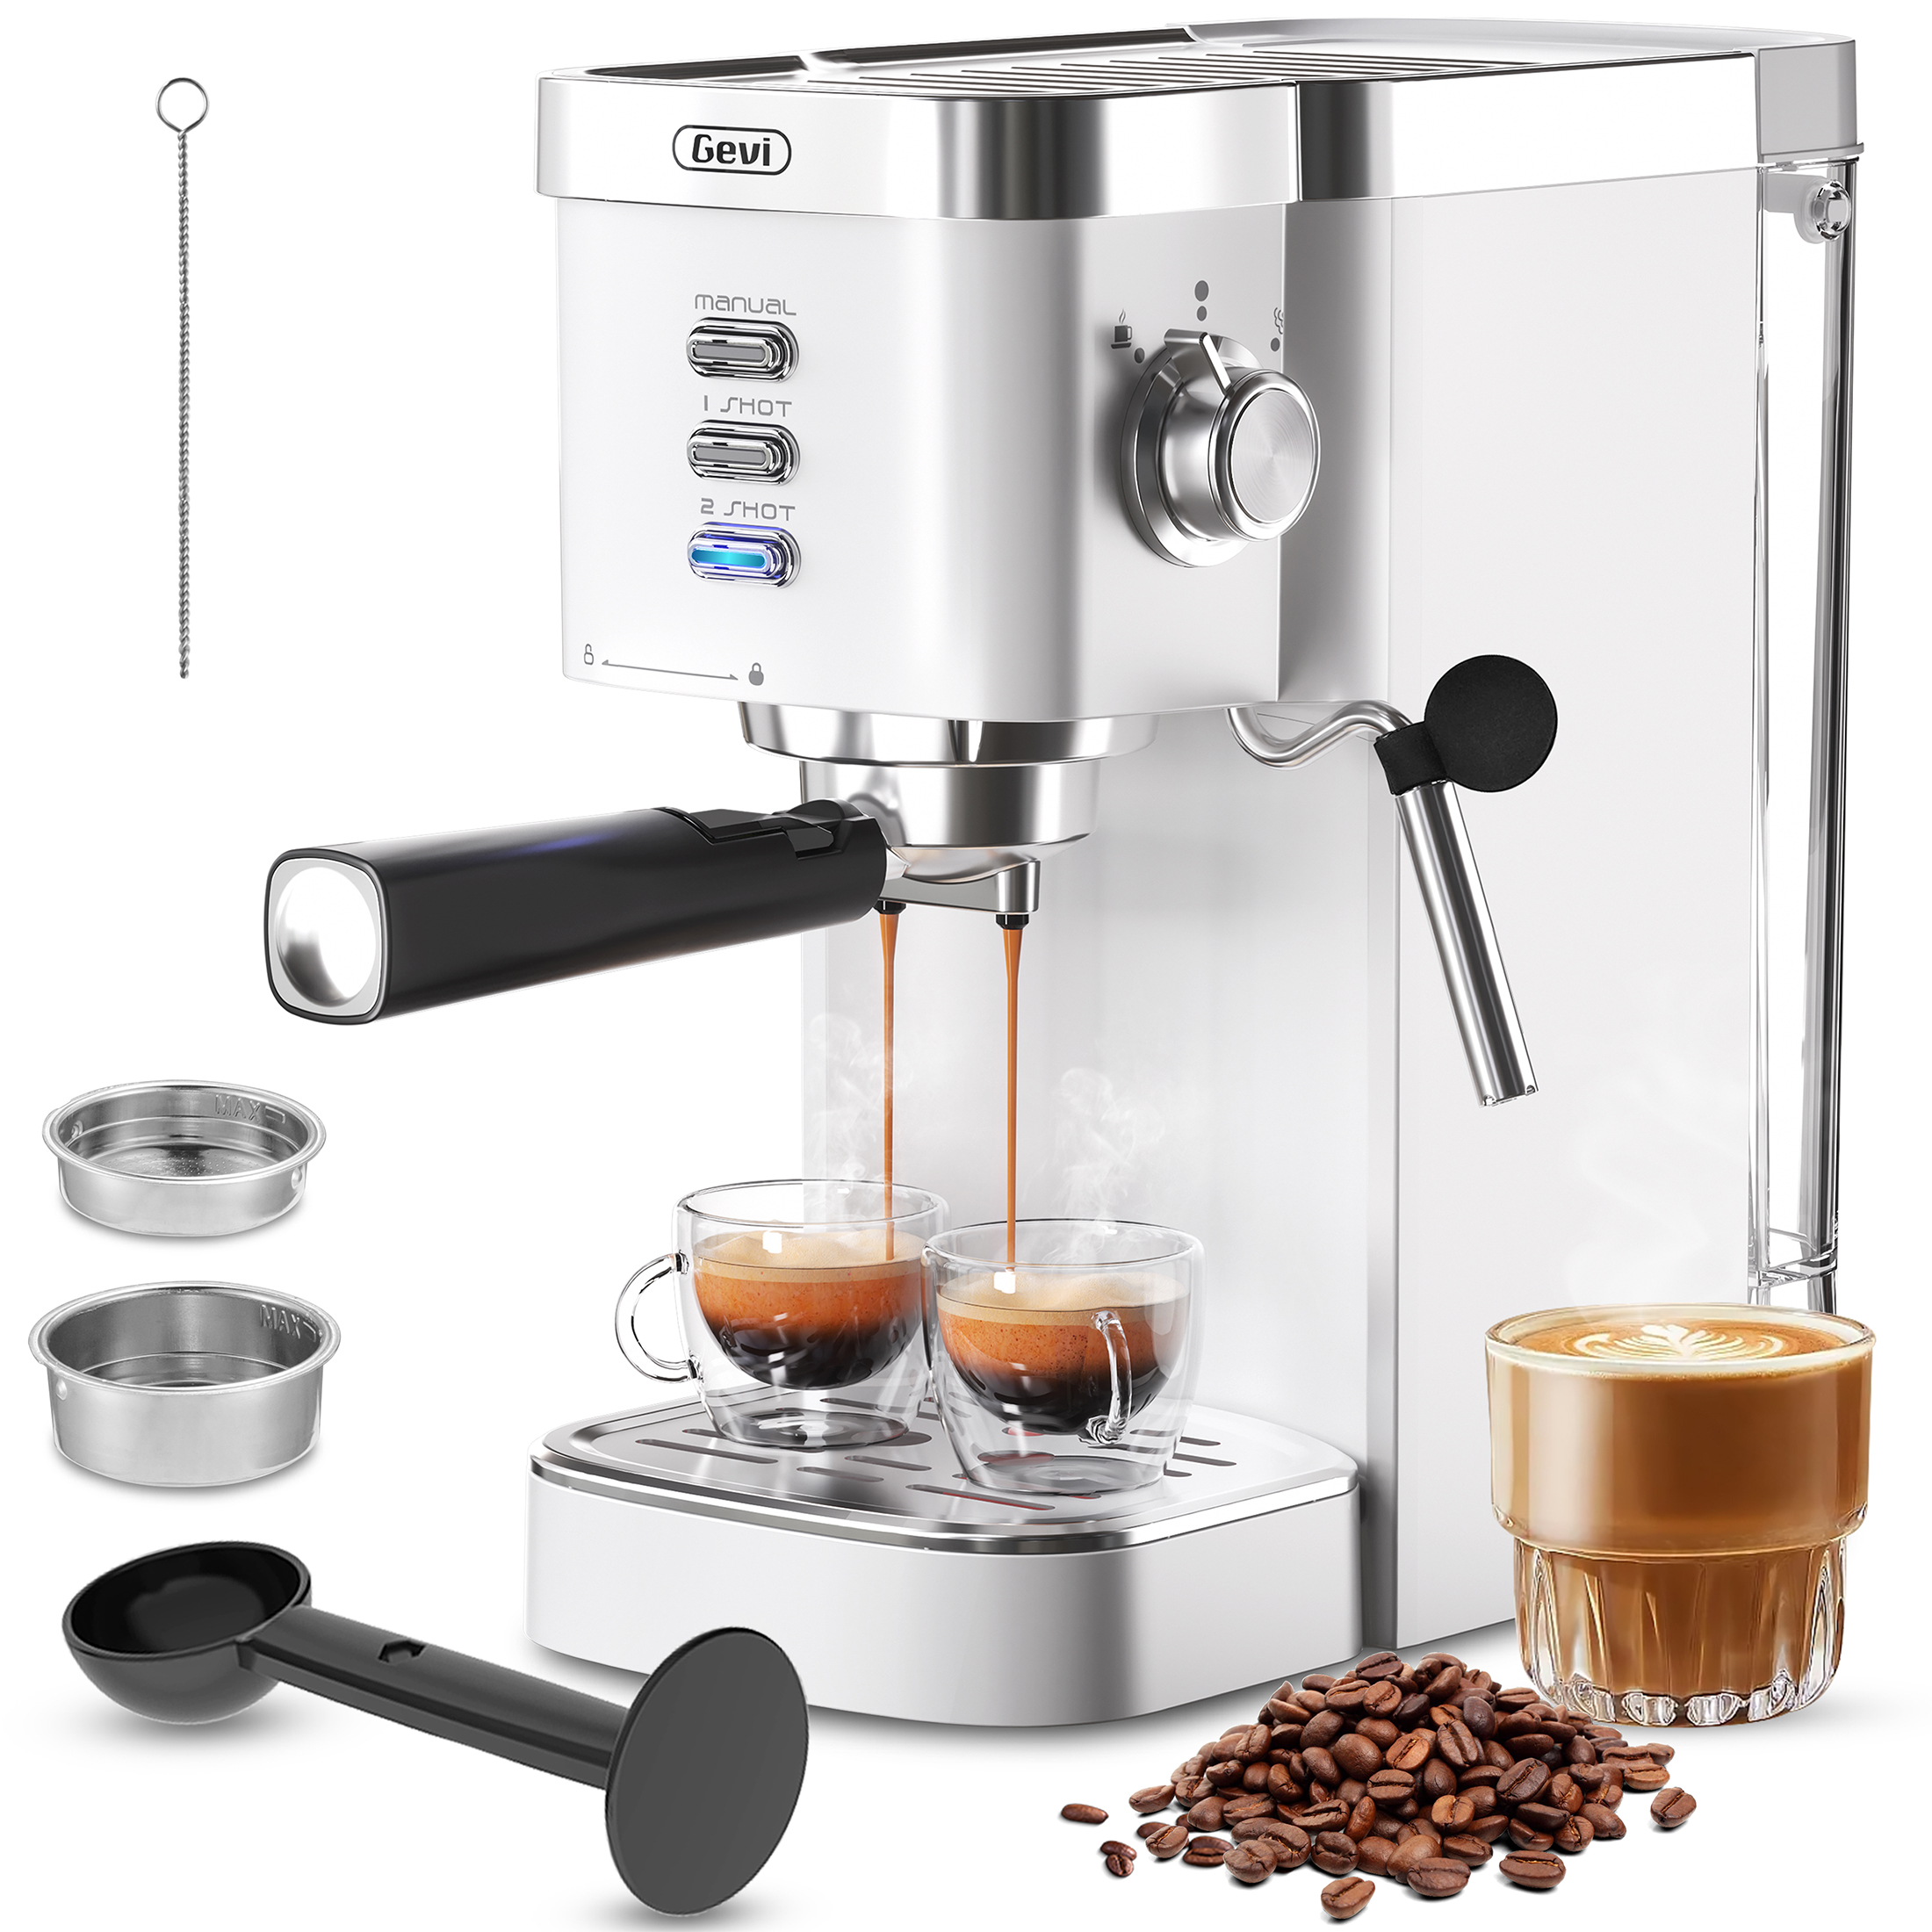 Gevi Espresso Machine 20 Bar Automatic Coffee Maker with Milk Frother Wand, 40.58 oz, New, White - image 1 of 9